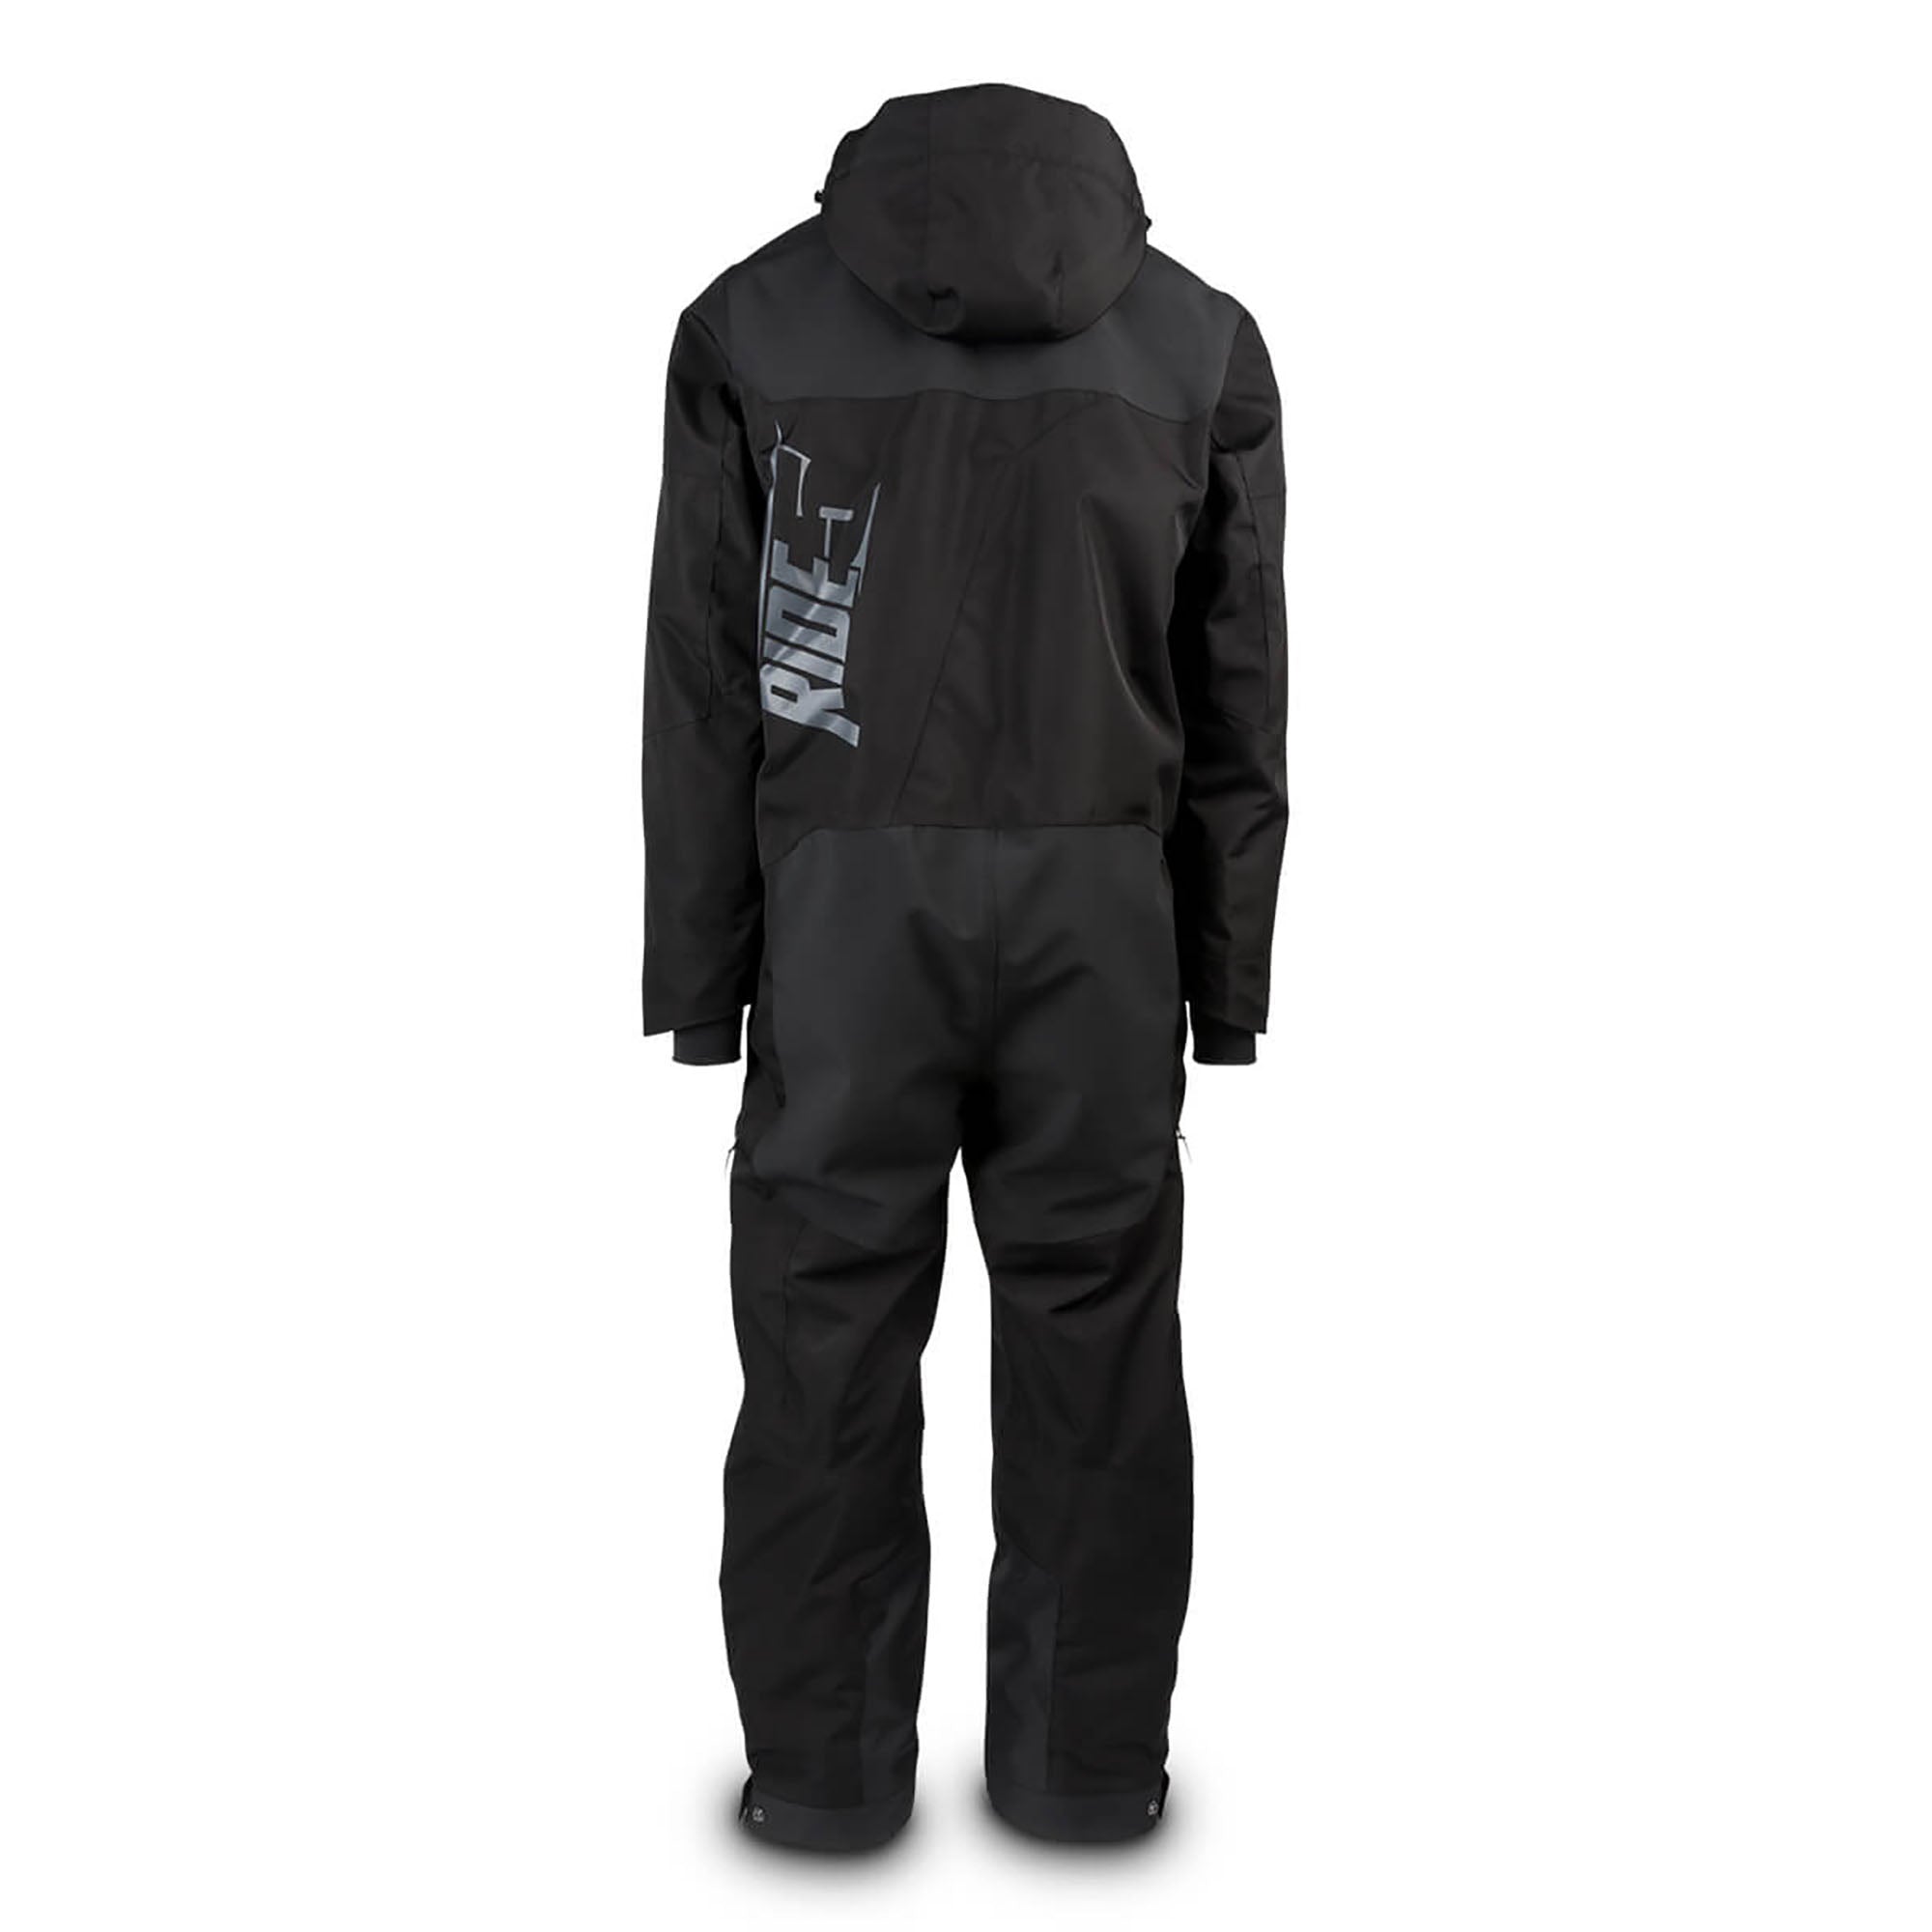 Genuine OEM 509 Allied Insulated Mono Suit